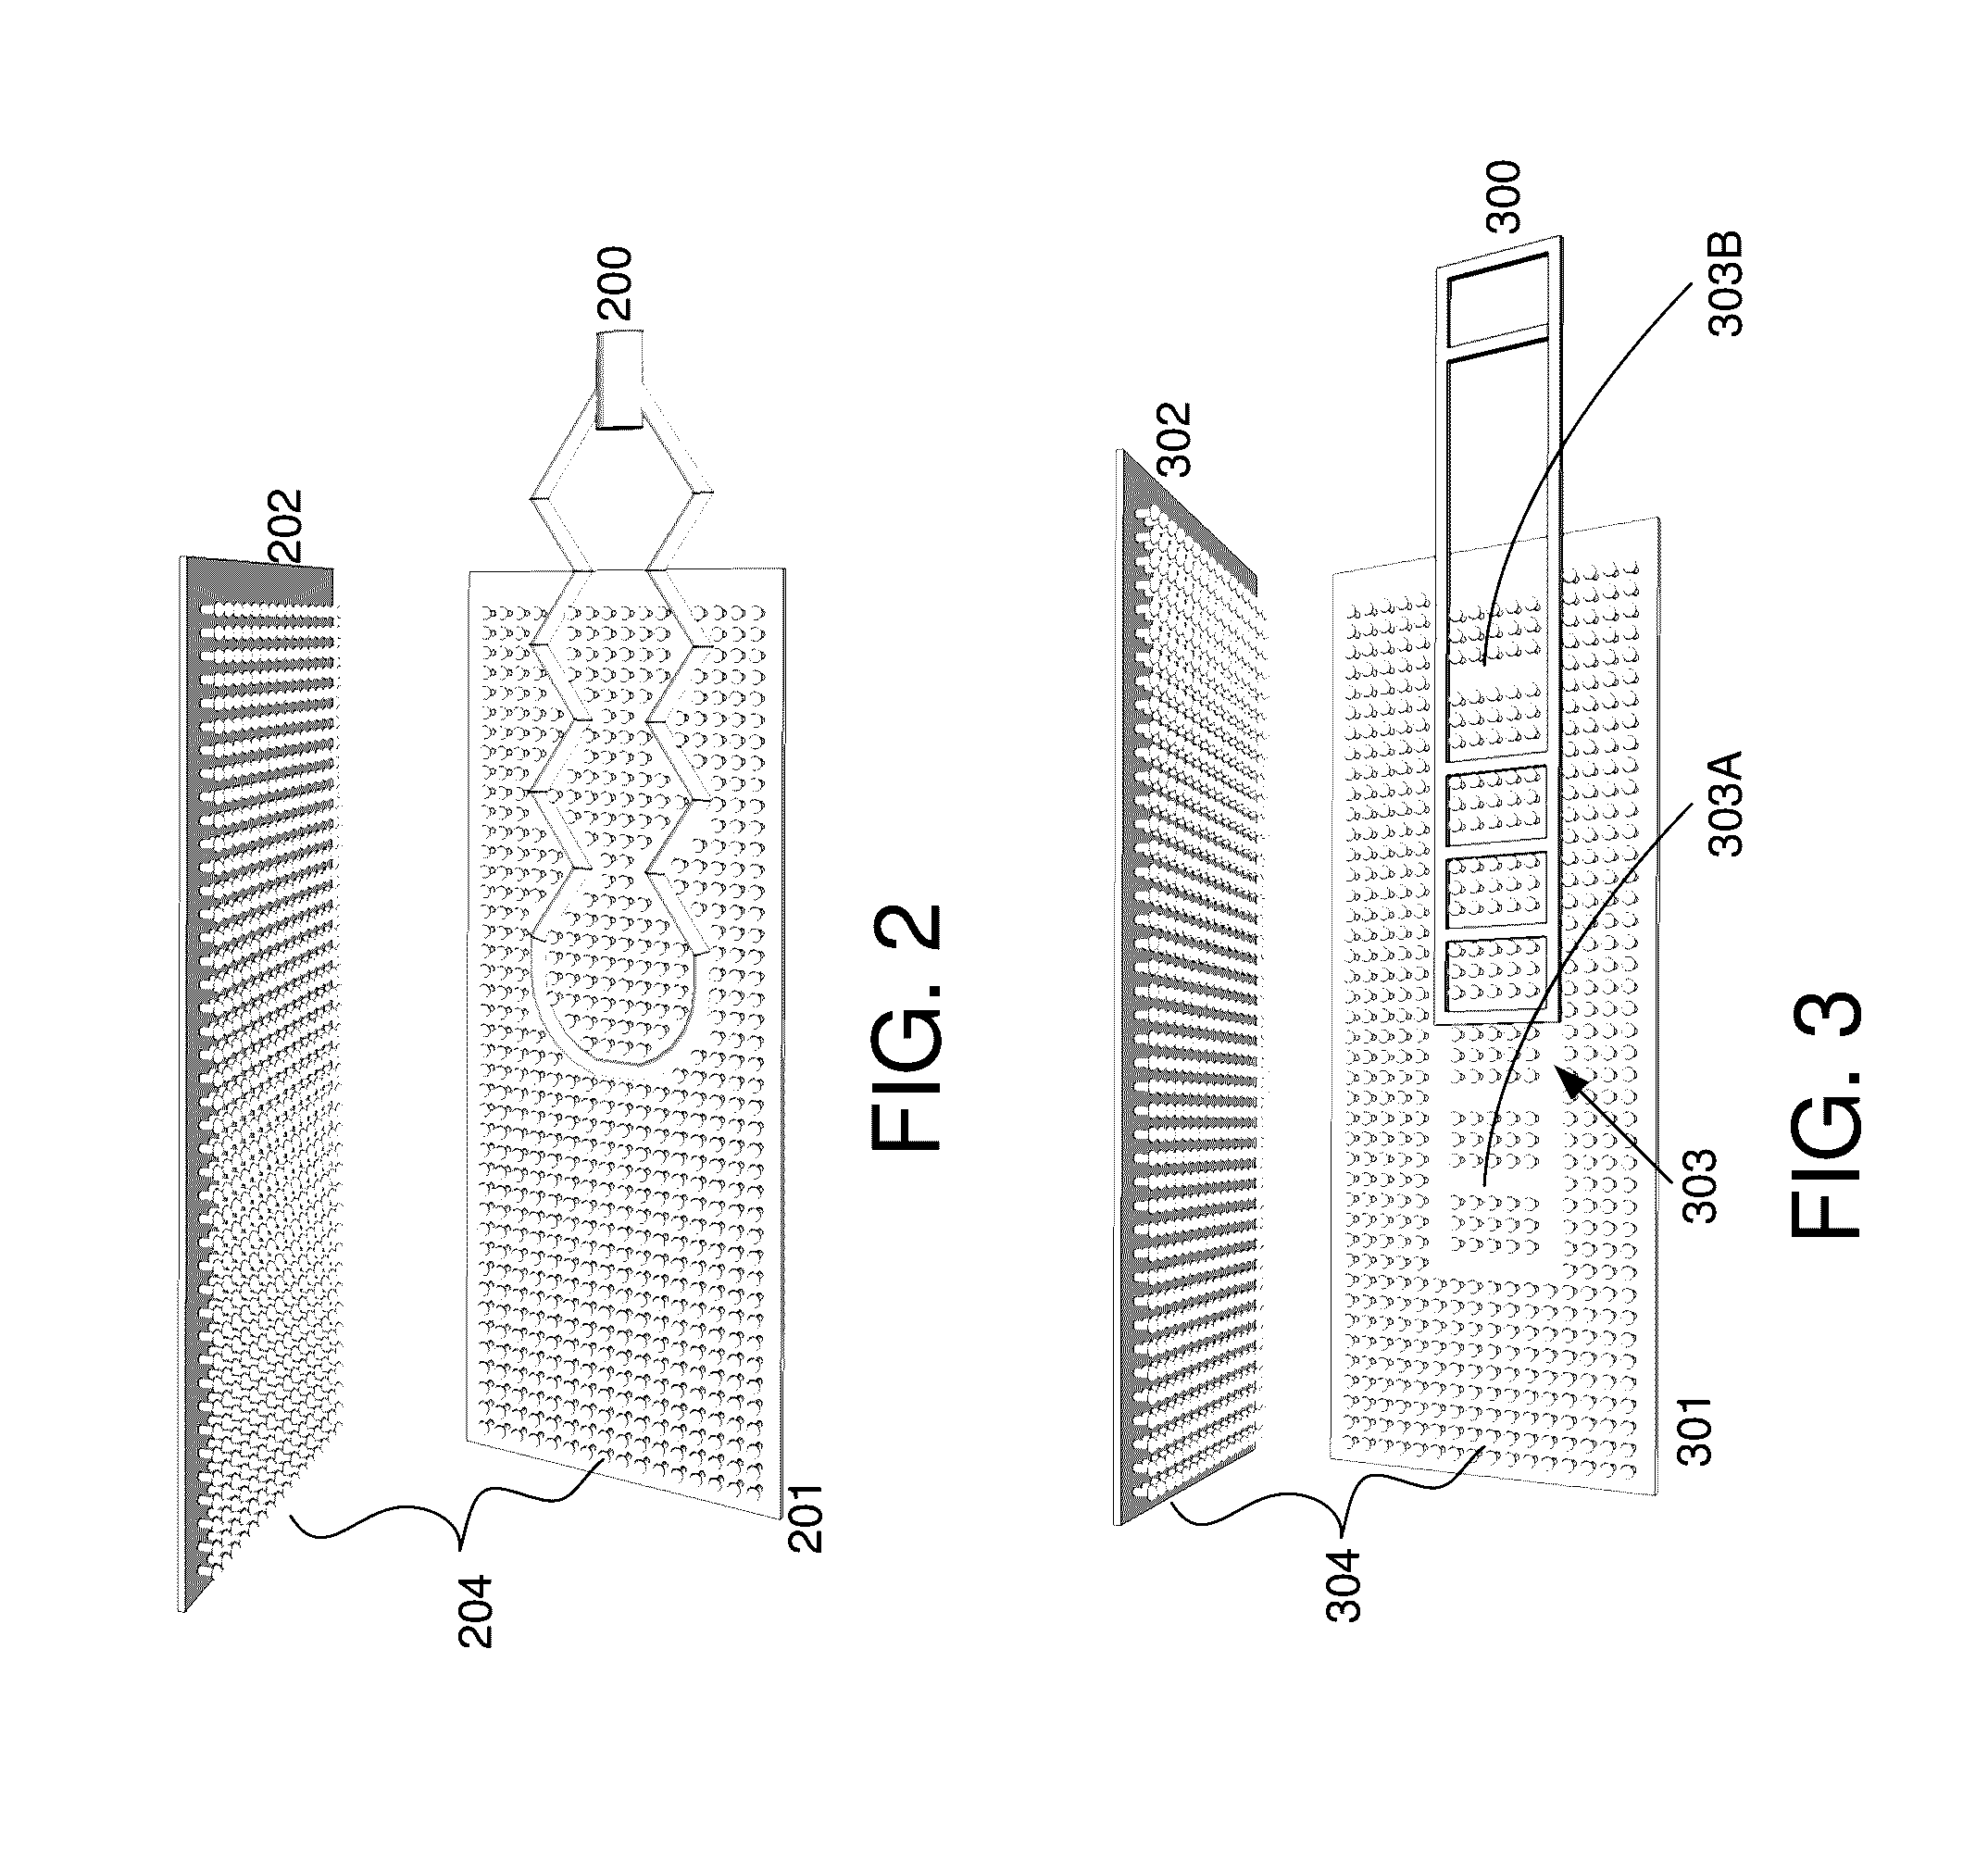 Apparatus and method of embedding articles within reclosable fastener systems